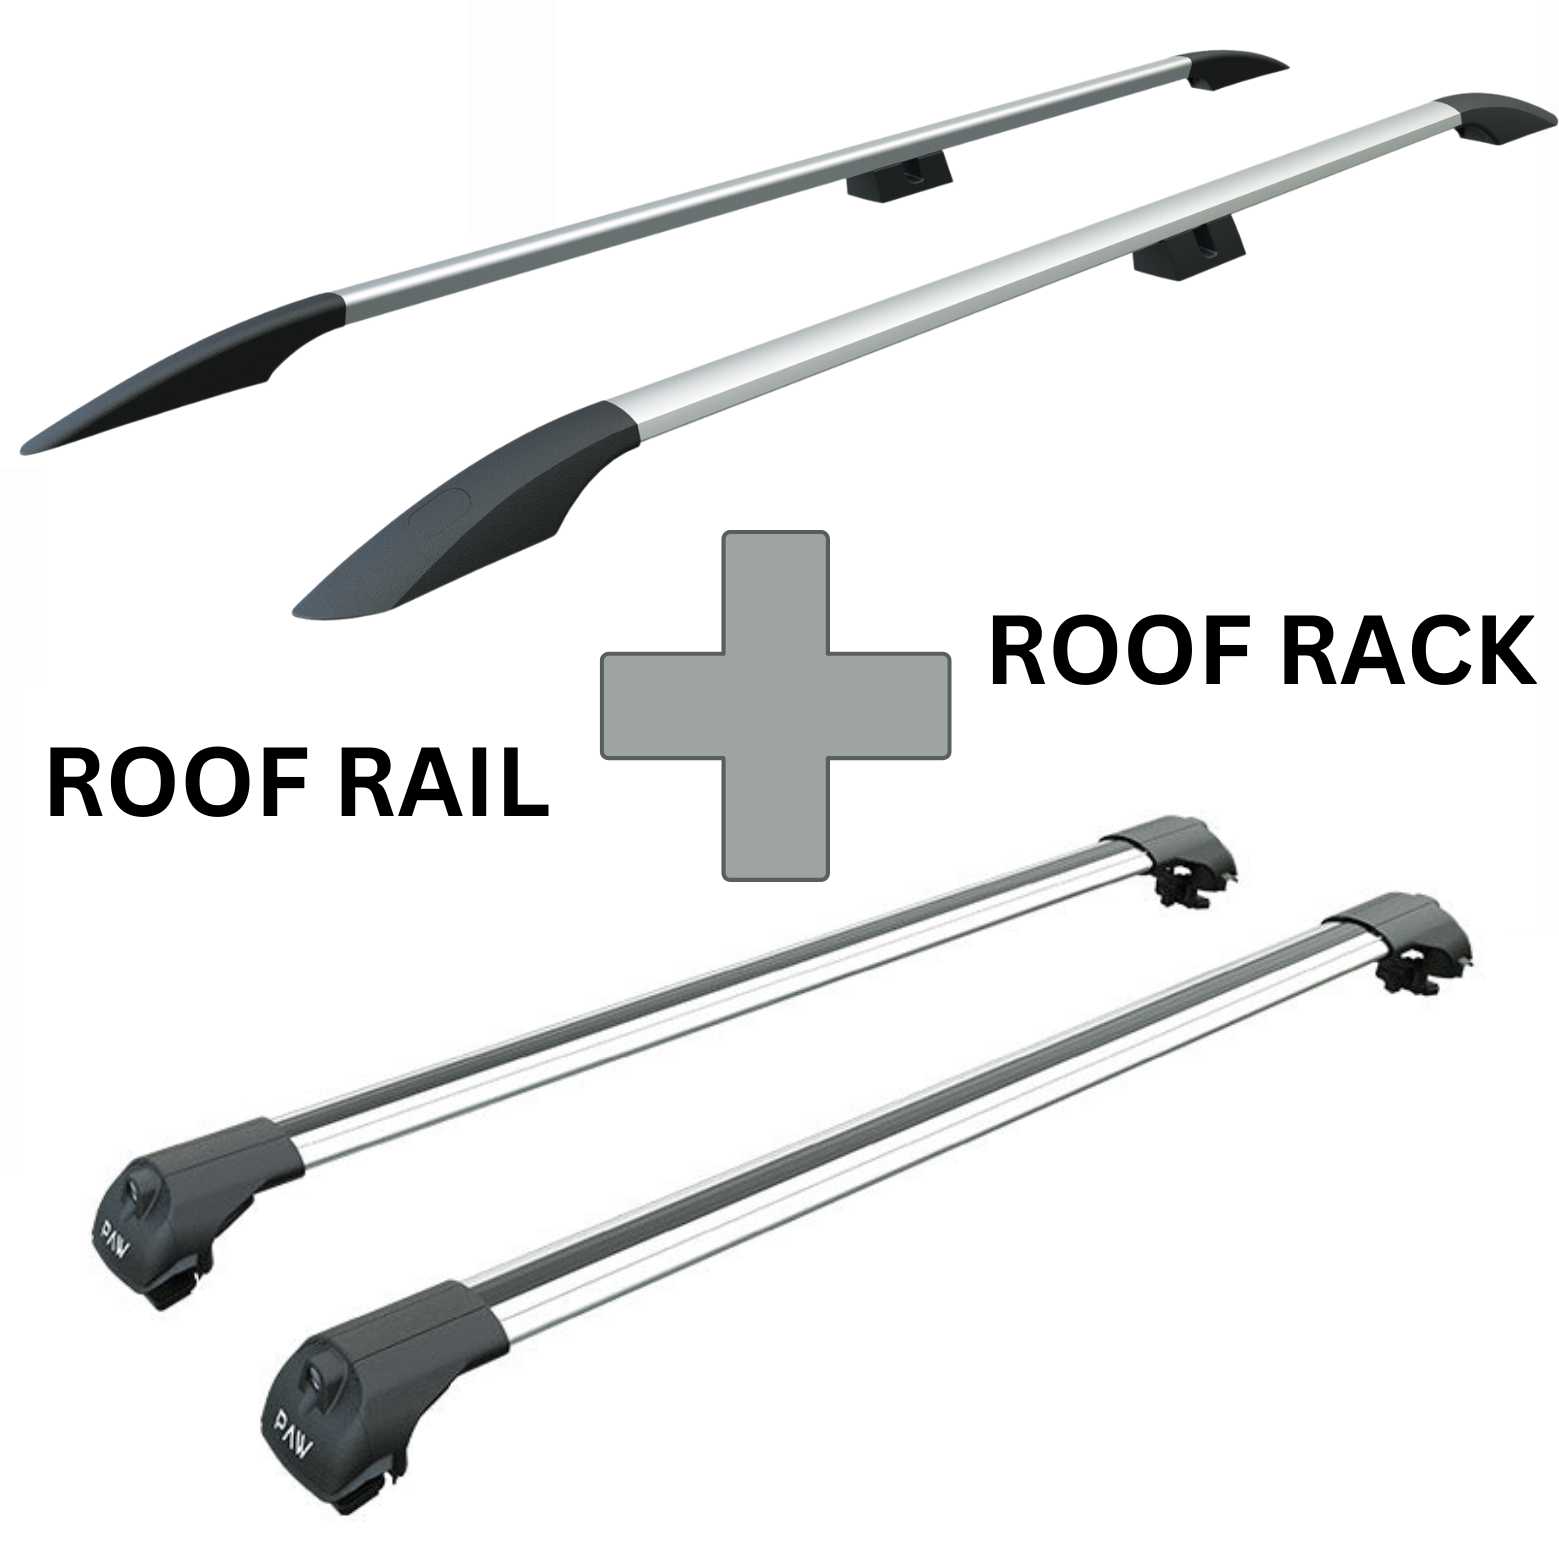 For Toyota ProAce City 2020-Up SWB Roof Side Rails and Roof Rack Cross Bar Alu Black